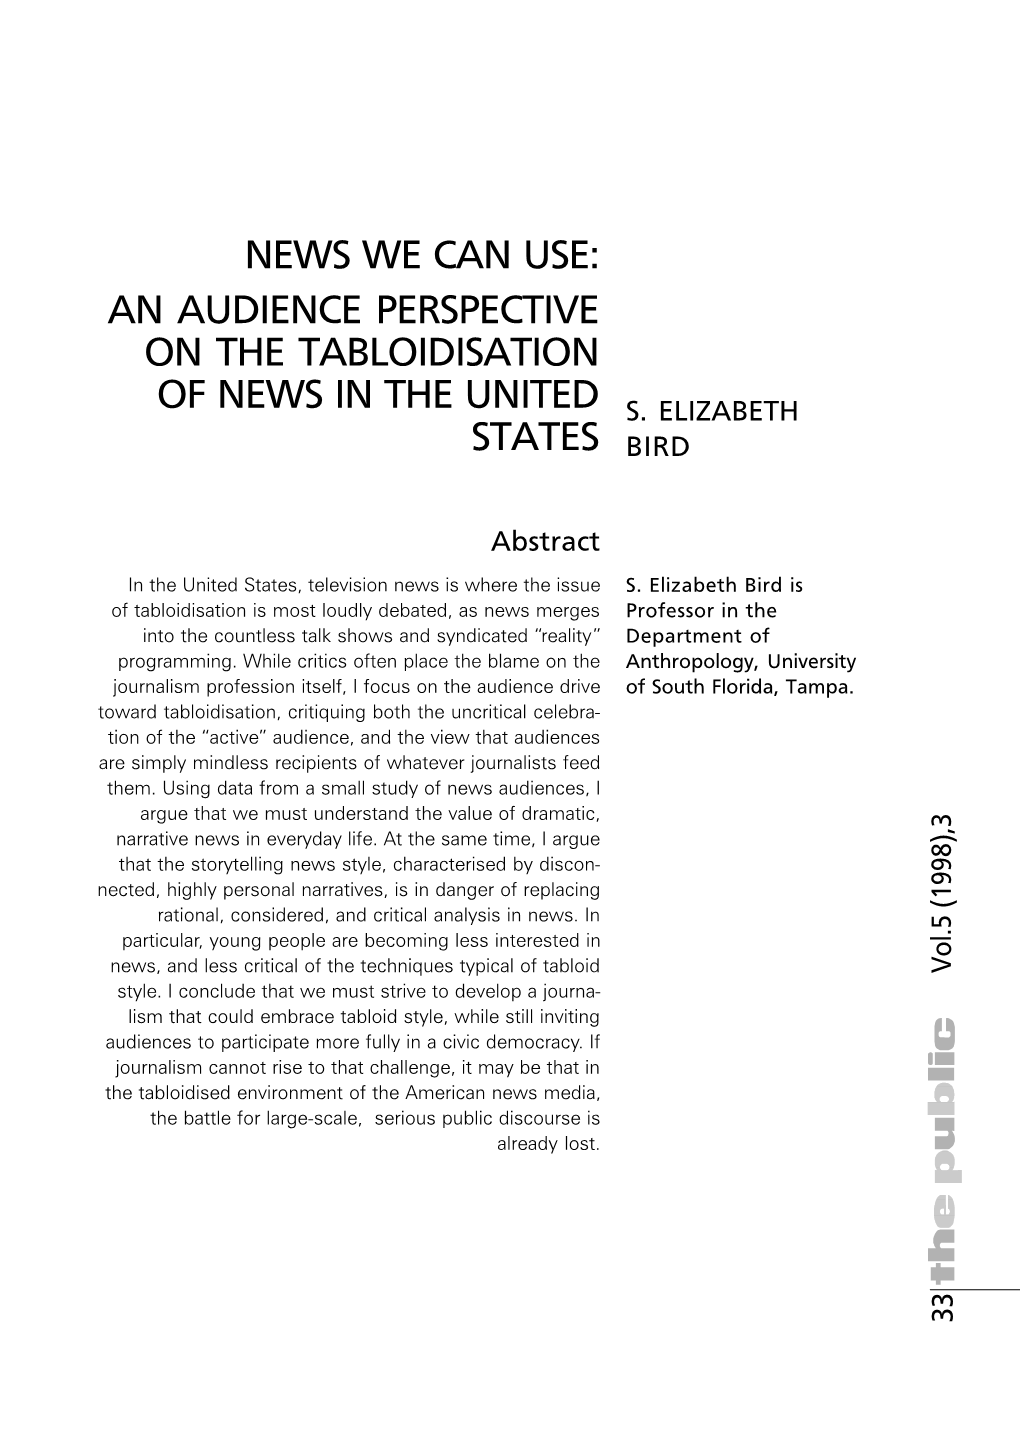 An Audience Perspective on the Tabloidisation of News in The